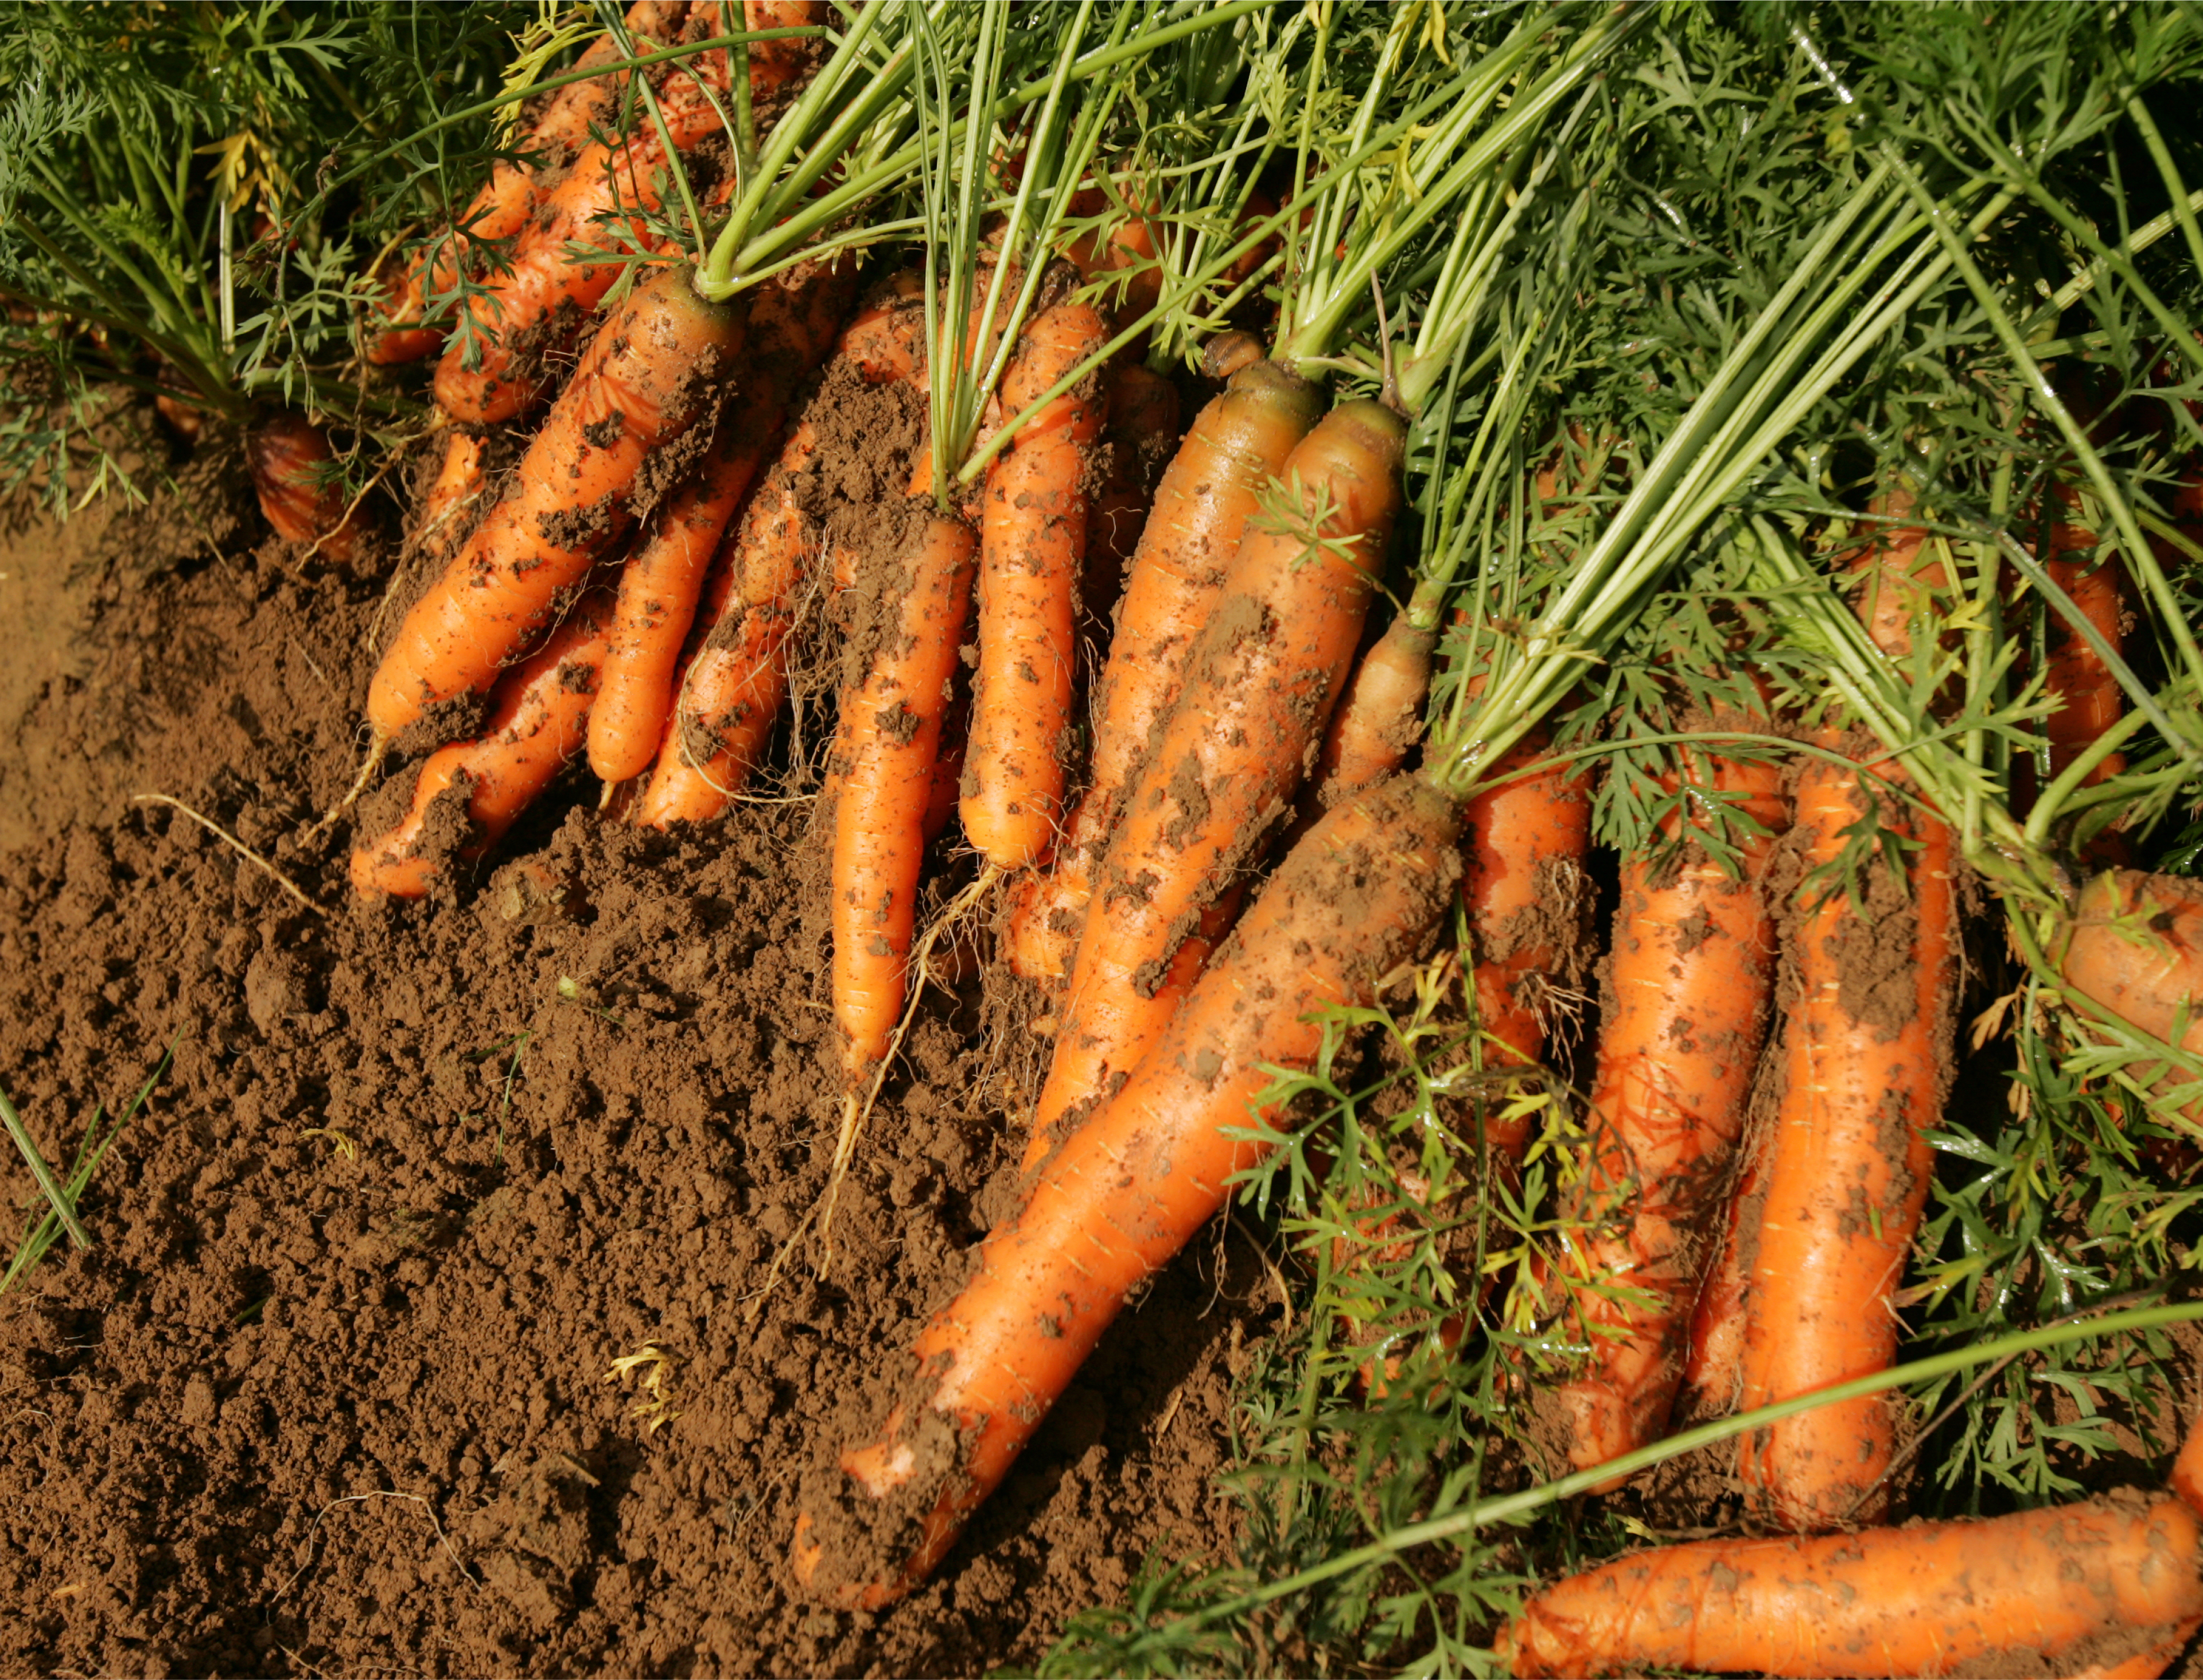 Freshly plucked carrots lying on the ground